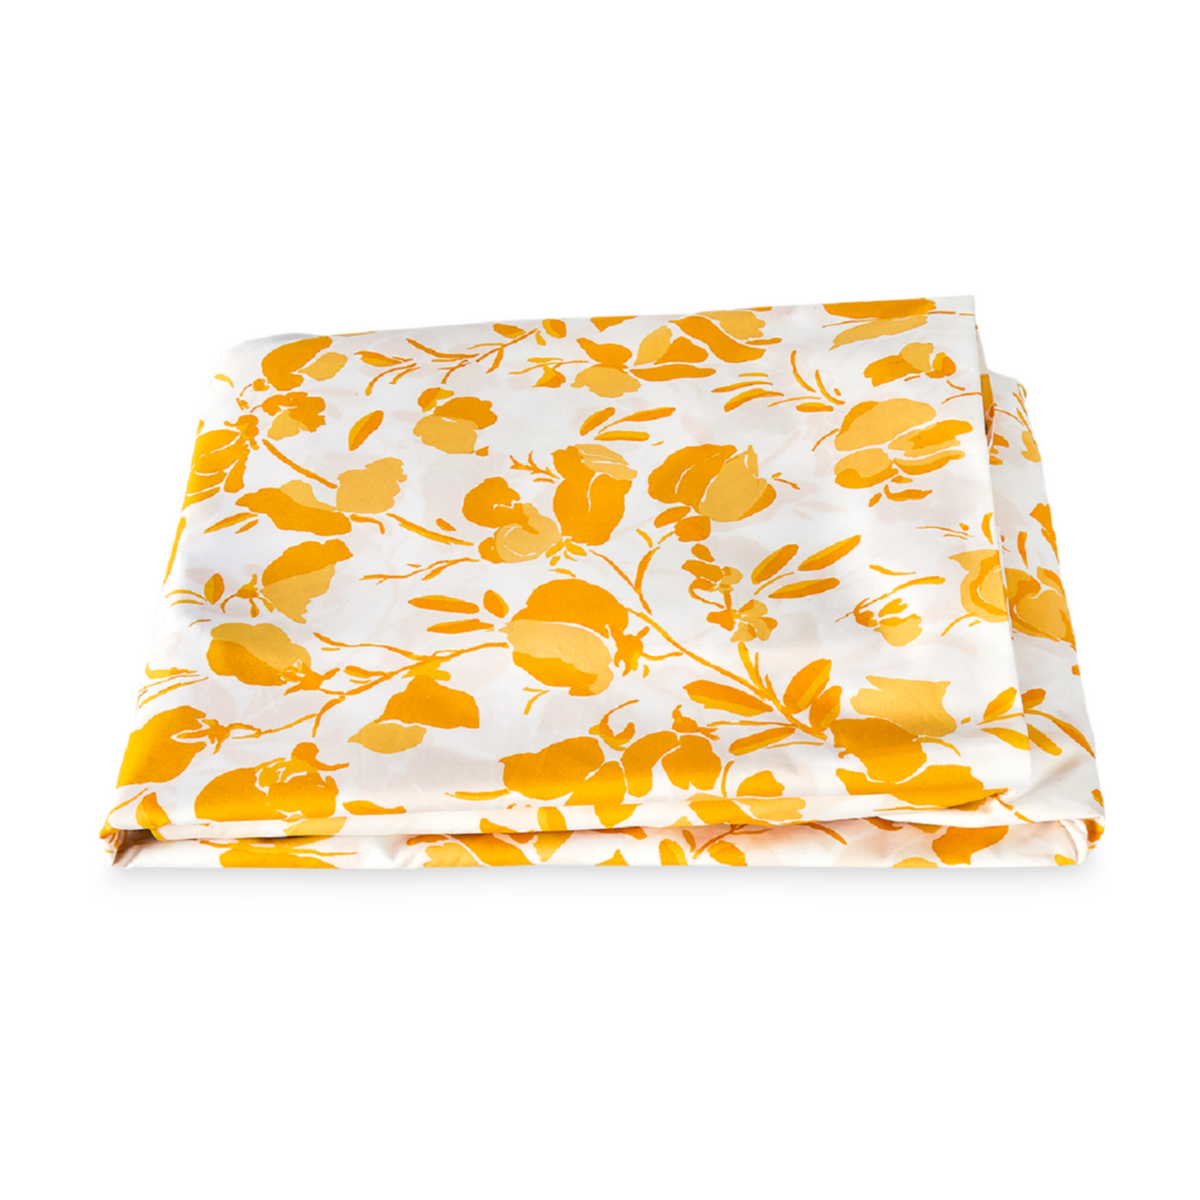 Fitted Sheet of Matouk Alexandra Bedding Goldenrod Color